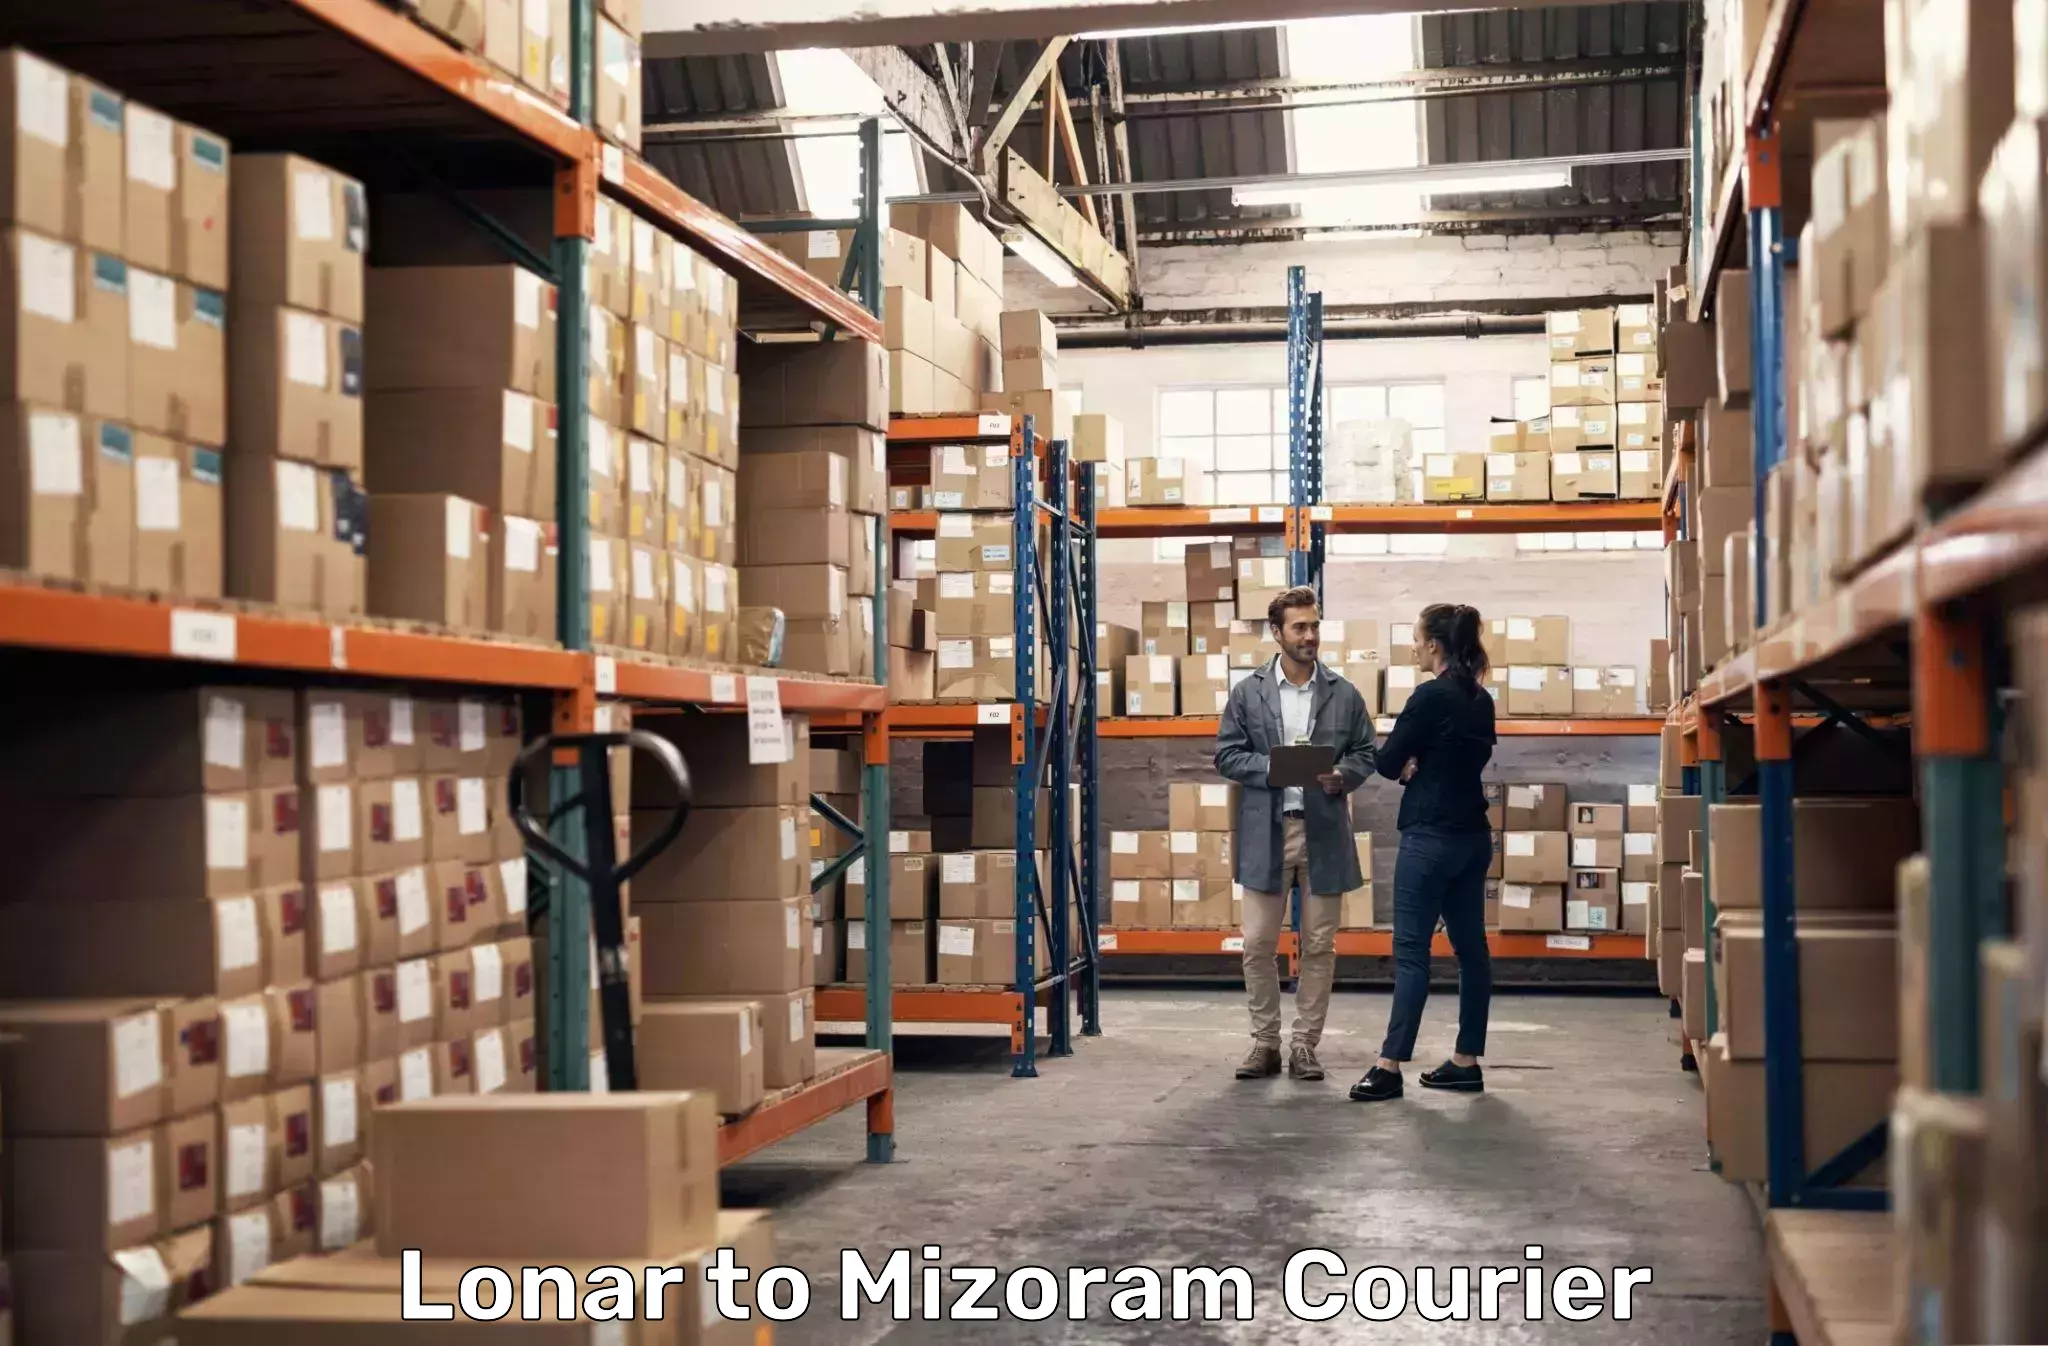 Urgent courier needs Lonar to Darlawn